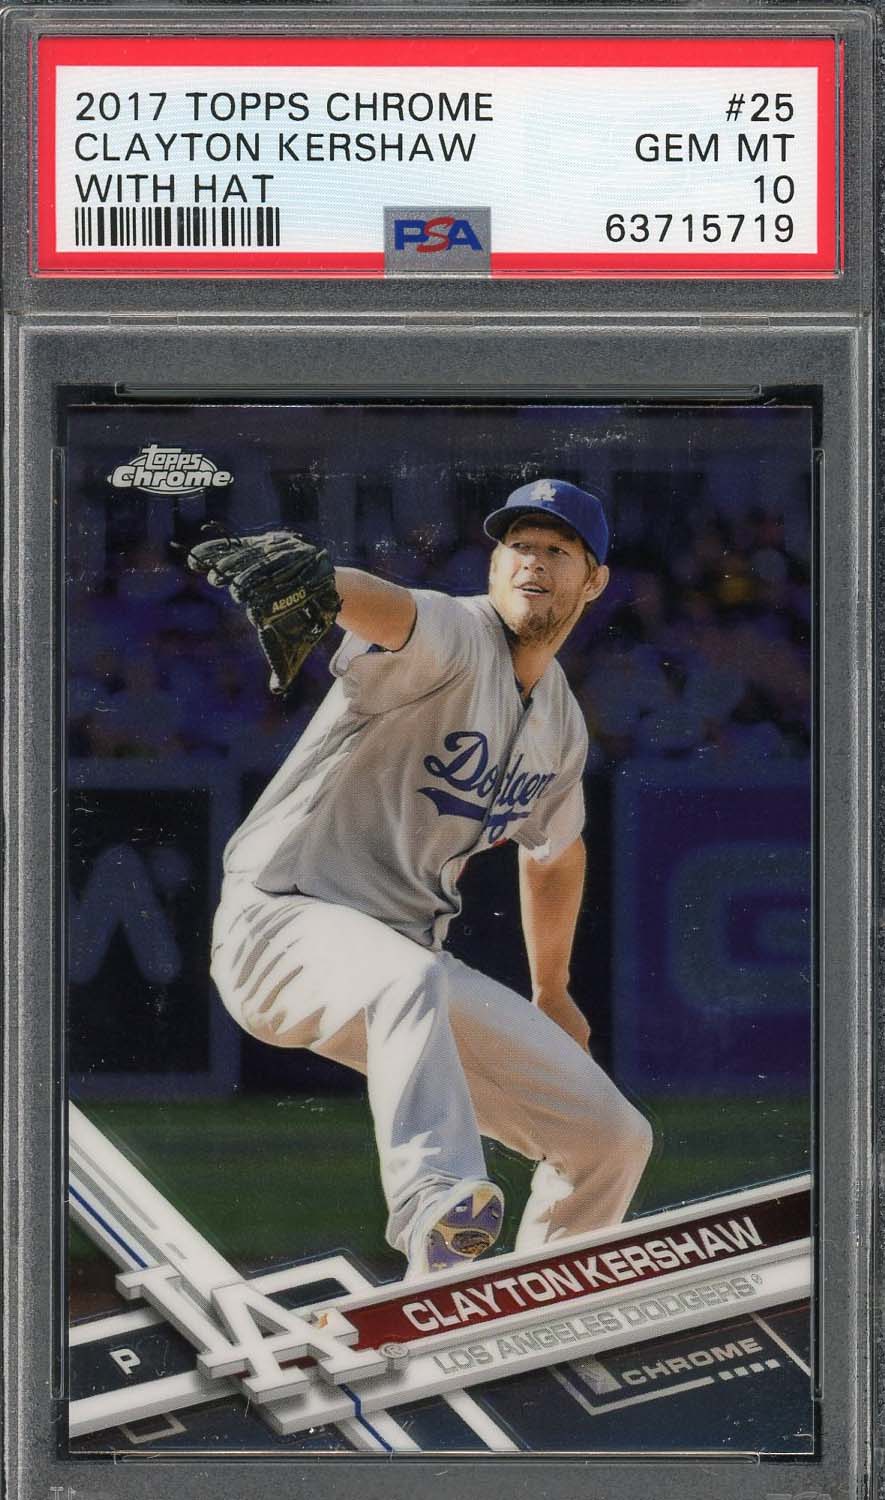 Clayton Kershaw 2017 Topps Chrome With Hat Baseball Card #25 Graded PSA 10